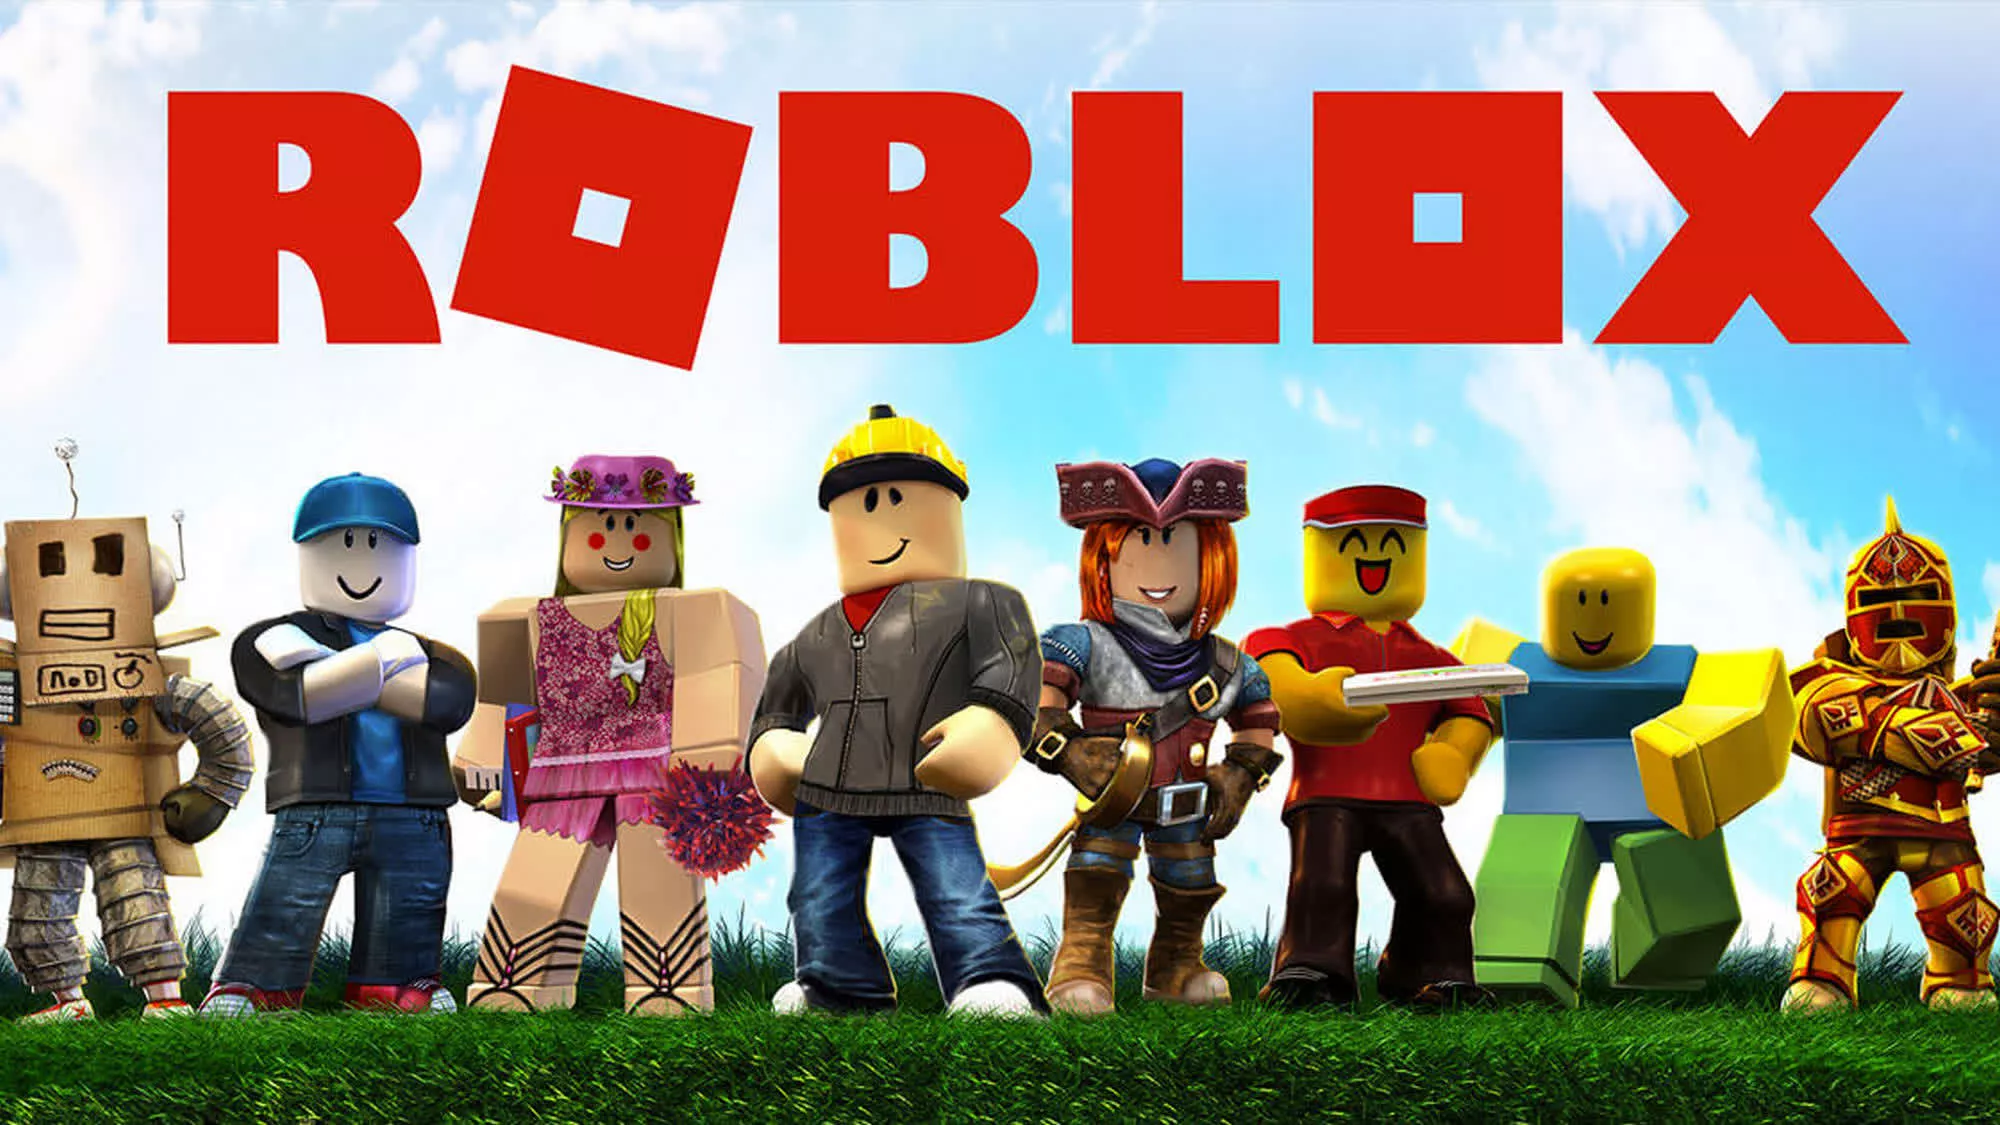 Roblox is finally coming to the PS5 and PS4 in October